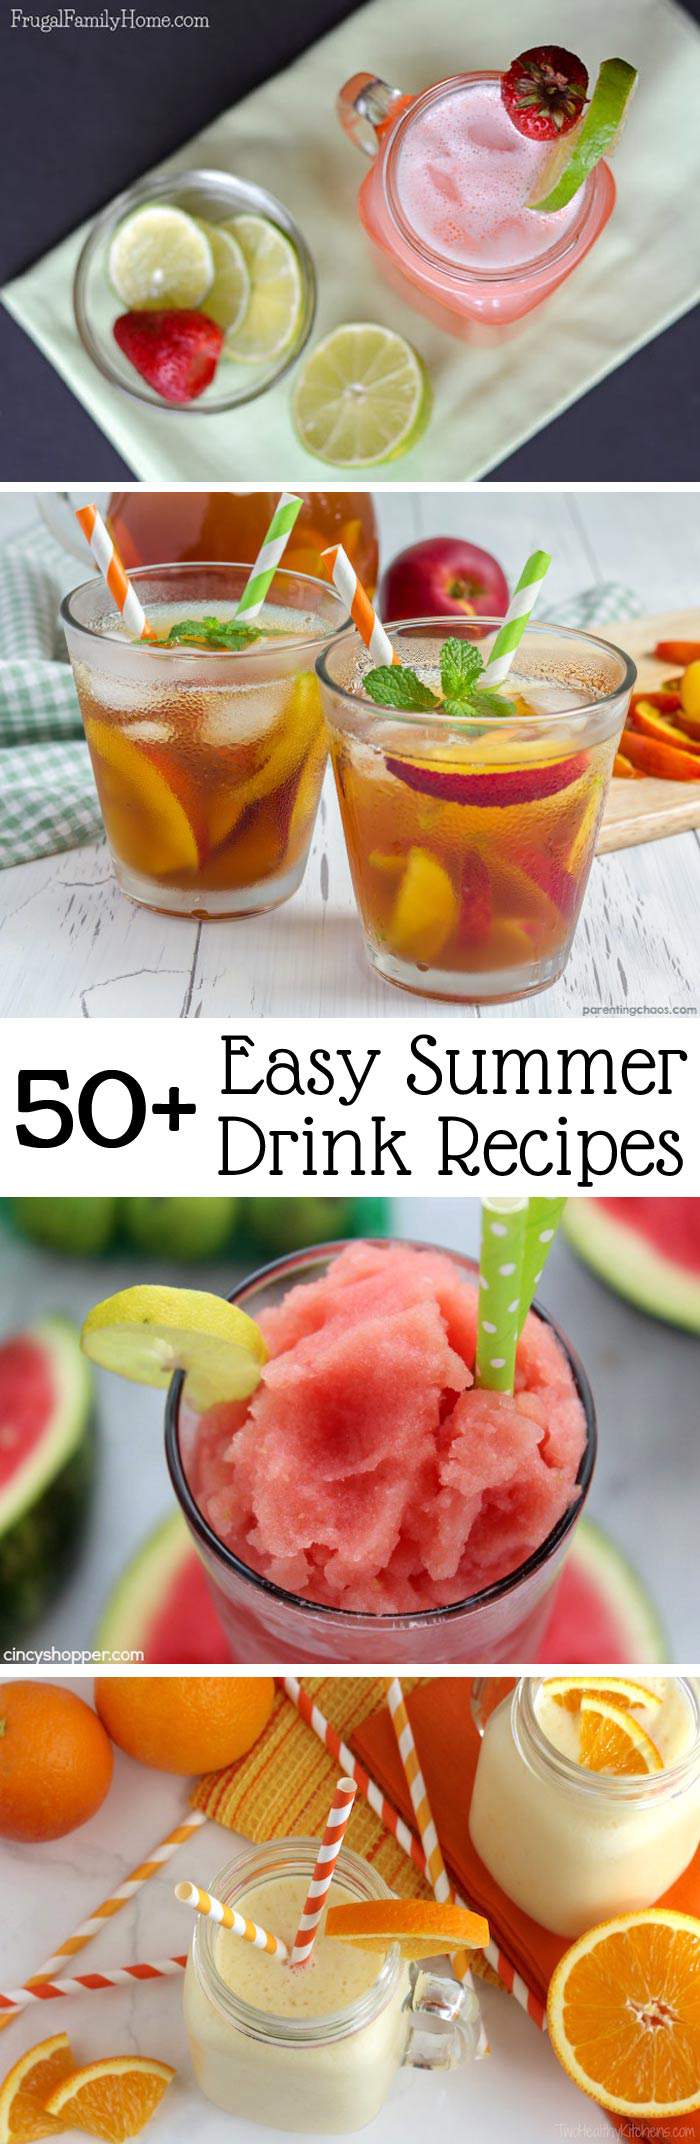 When it’s hot out it good to have a refreshing drink to enjoy and cool down. Quench your thirst with one of these 50+ nonalcoholic drink recipes. This collection of easy recipes are perfect for every day or even for a summer party. Find your new summer favorite from this list.